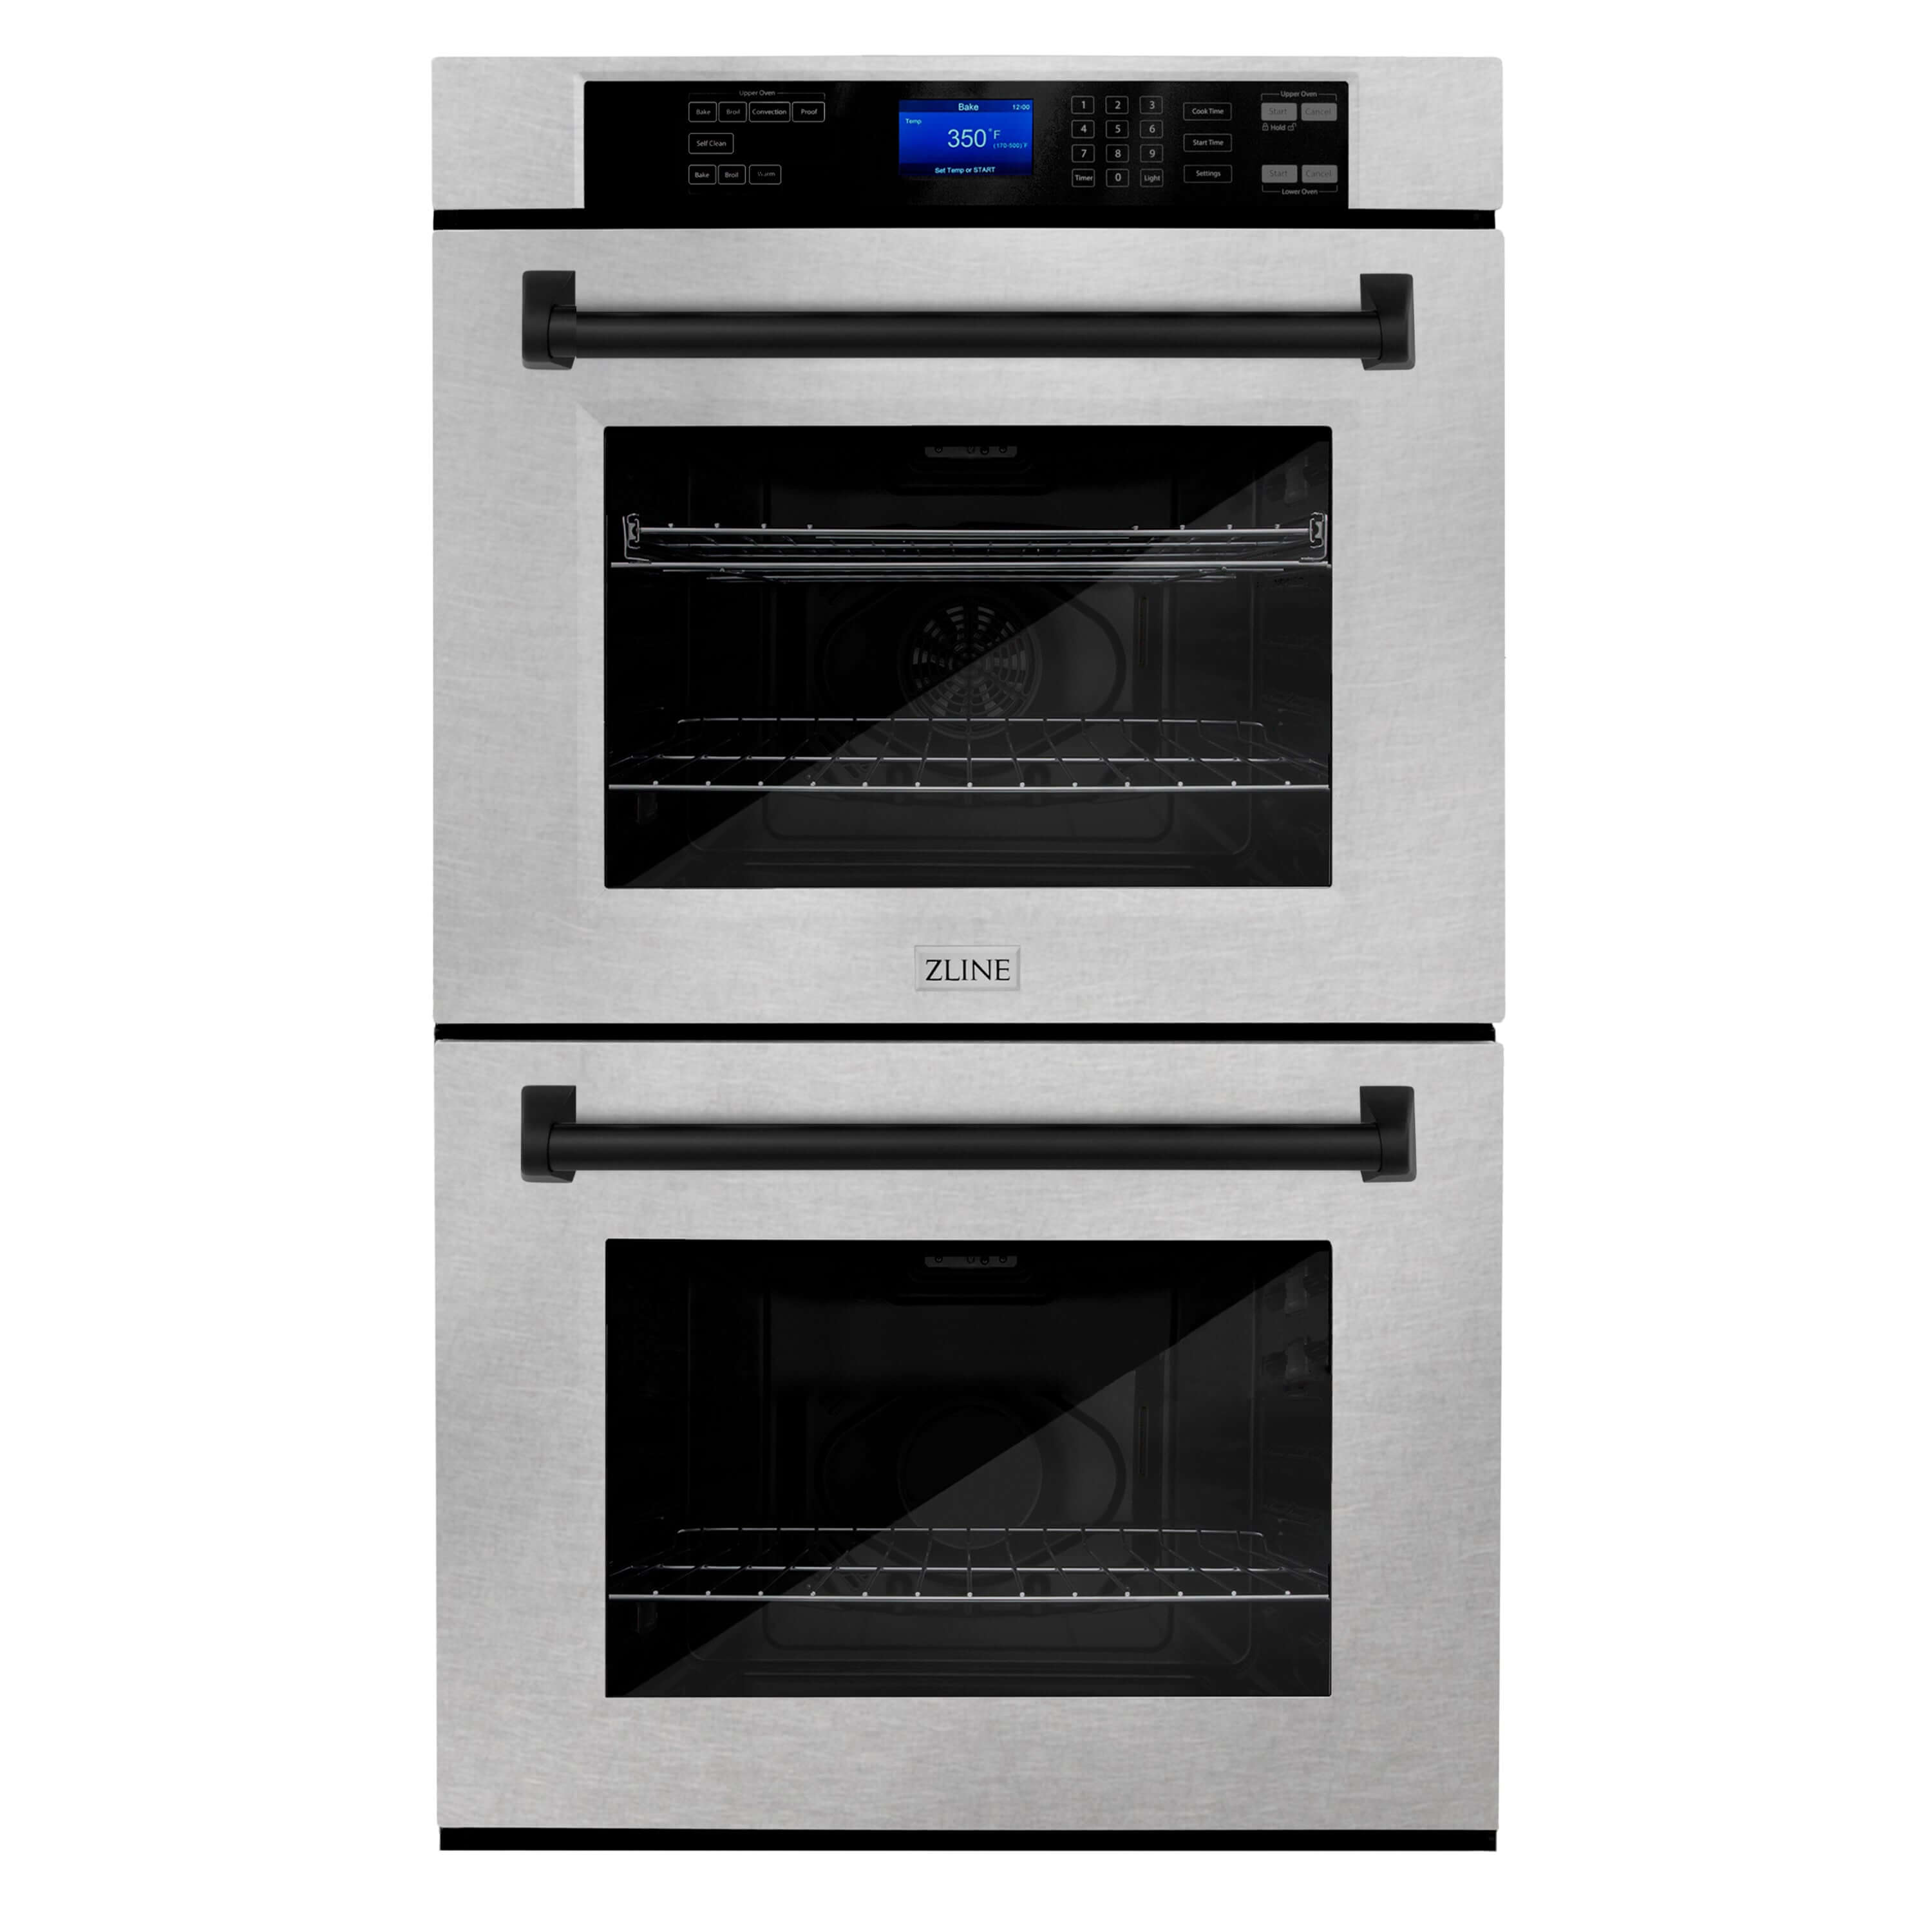 ZLINE Autograph Edition 30 in. Electric Double Wall Oven with Self Clean and True Convection in DuraSnow Stainless Steel and Matte Black Accents (AWDSZ-30-MB) front, oven closed.